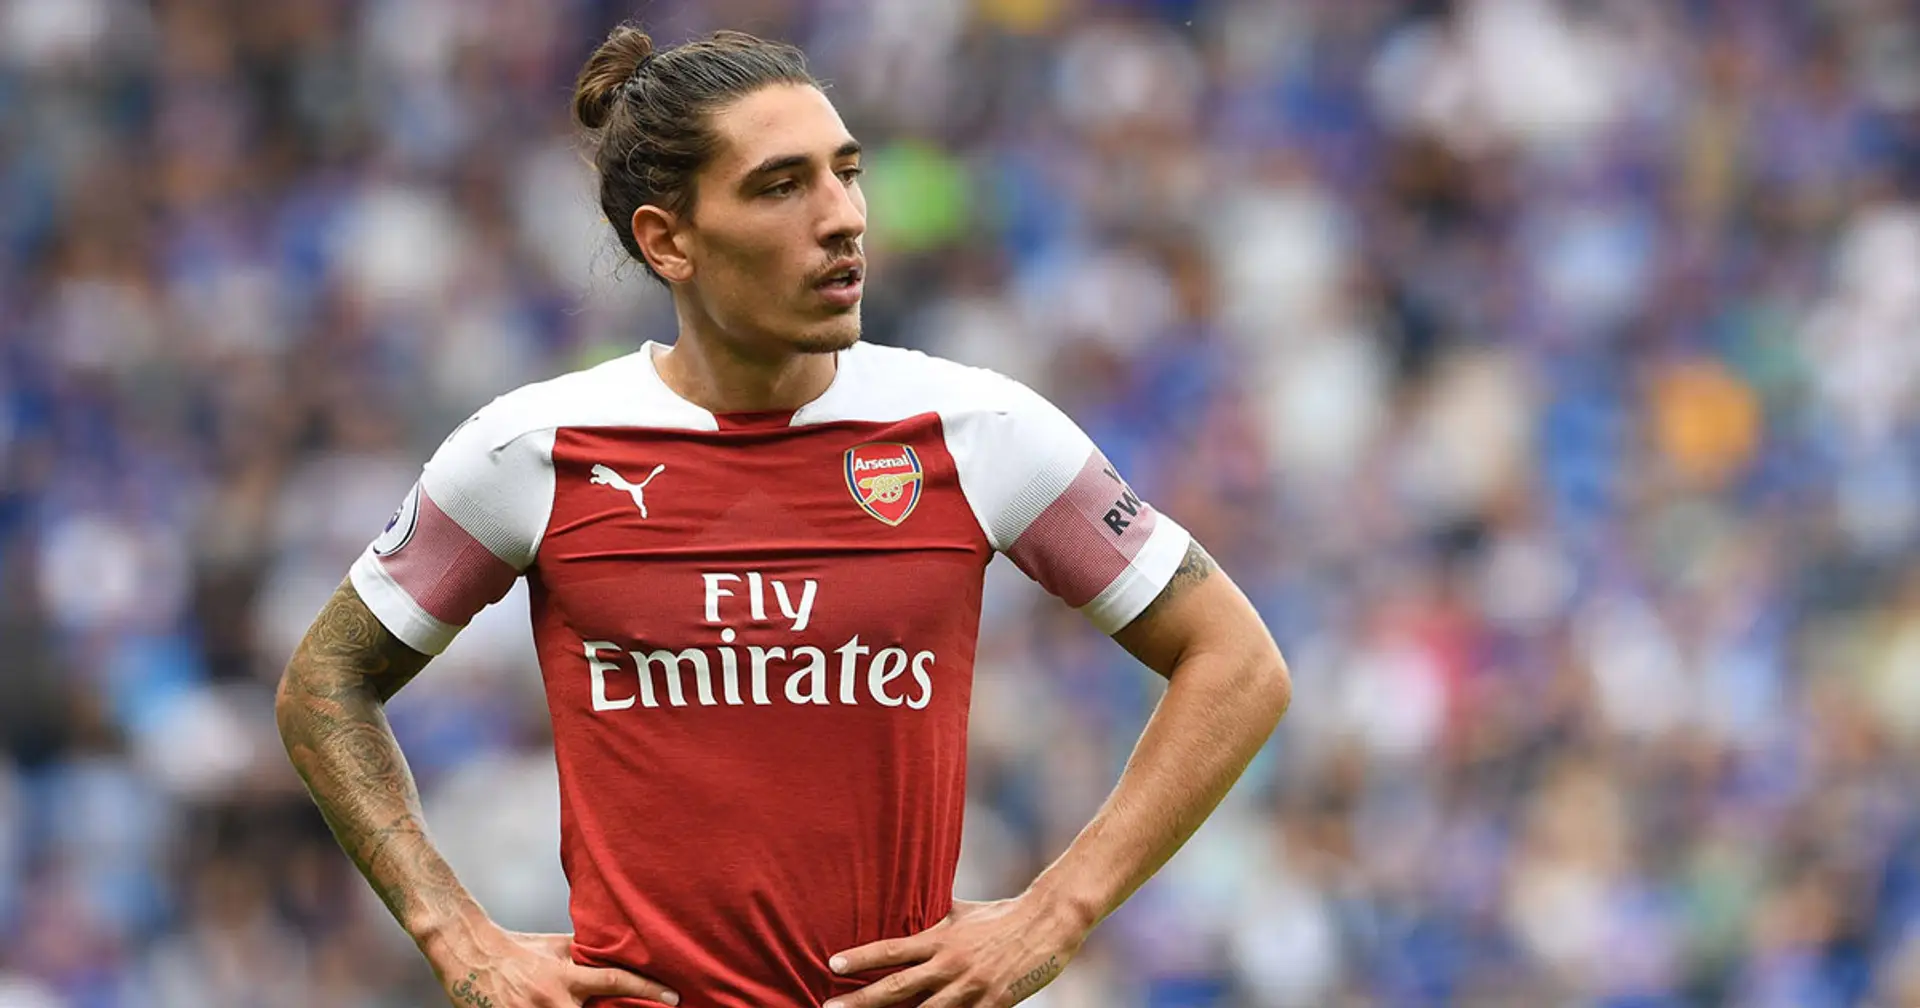 Unconventional leader: why Hector Bellerin should be Arsenal captain